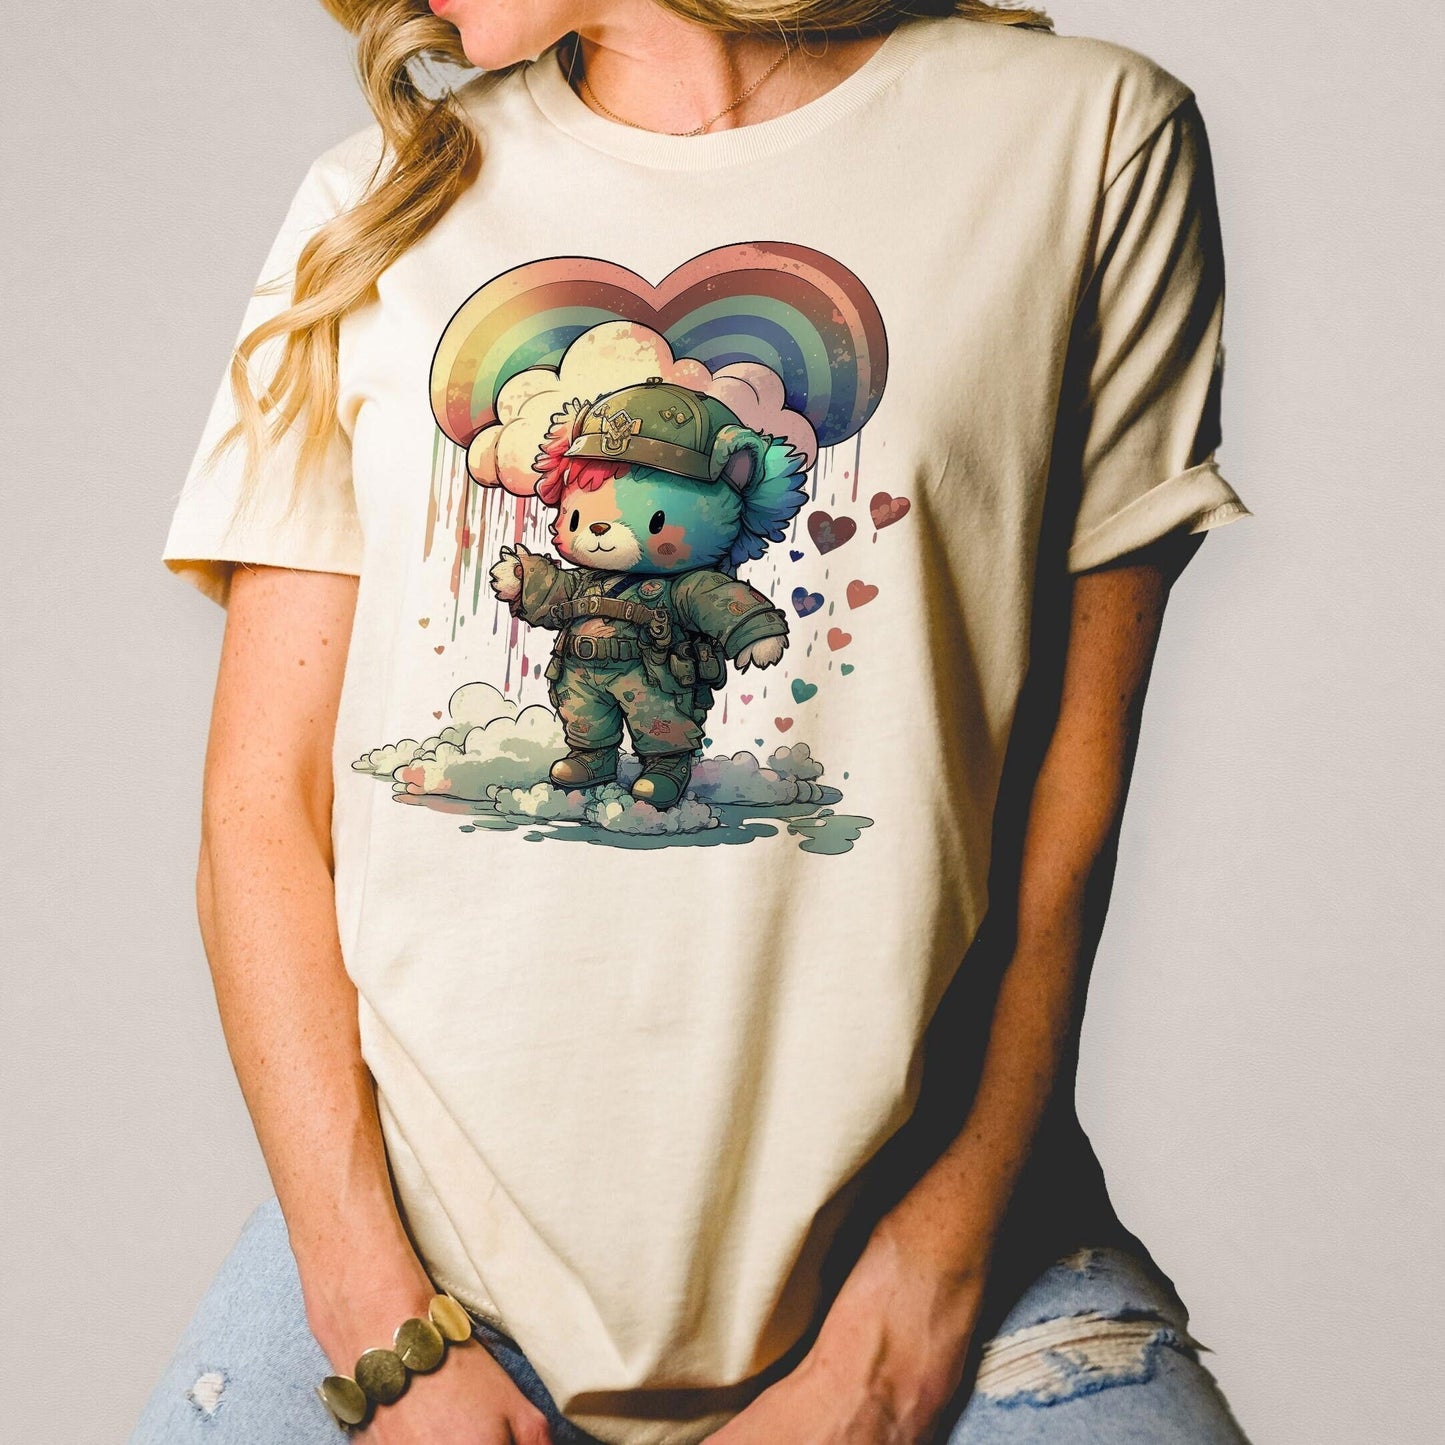 Illustrated Bears that Care 80s 1980s Army Brat Nostalgia Parody AI Generated Graphic Tee Unisex Soft Tee T-shirt for Women or Men